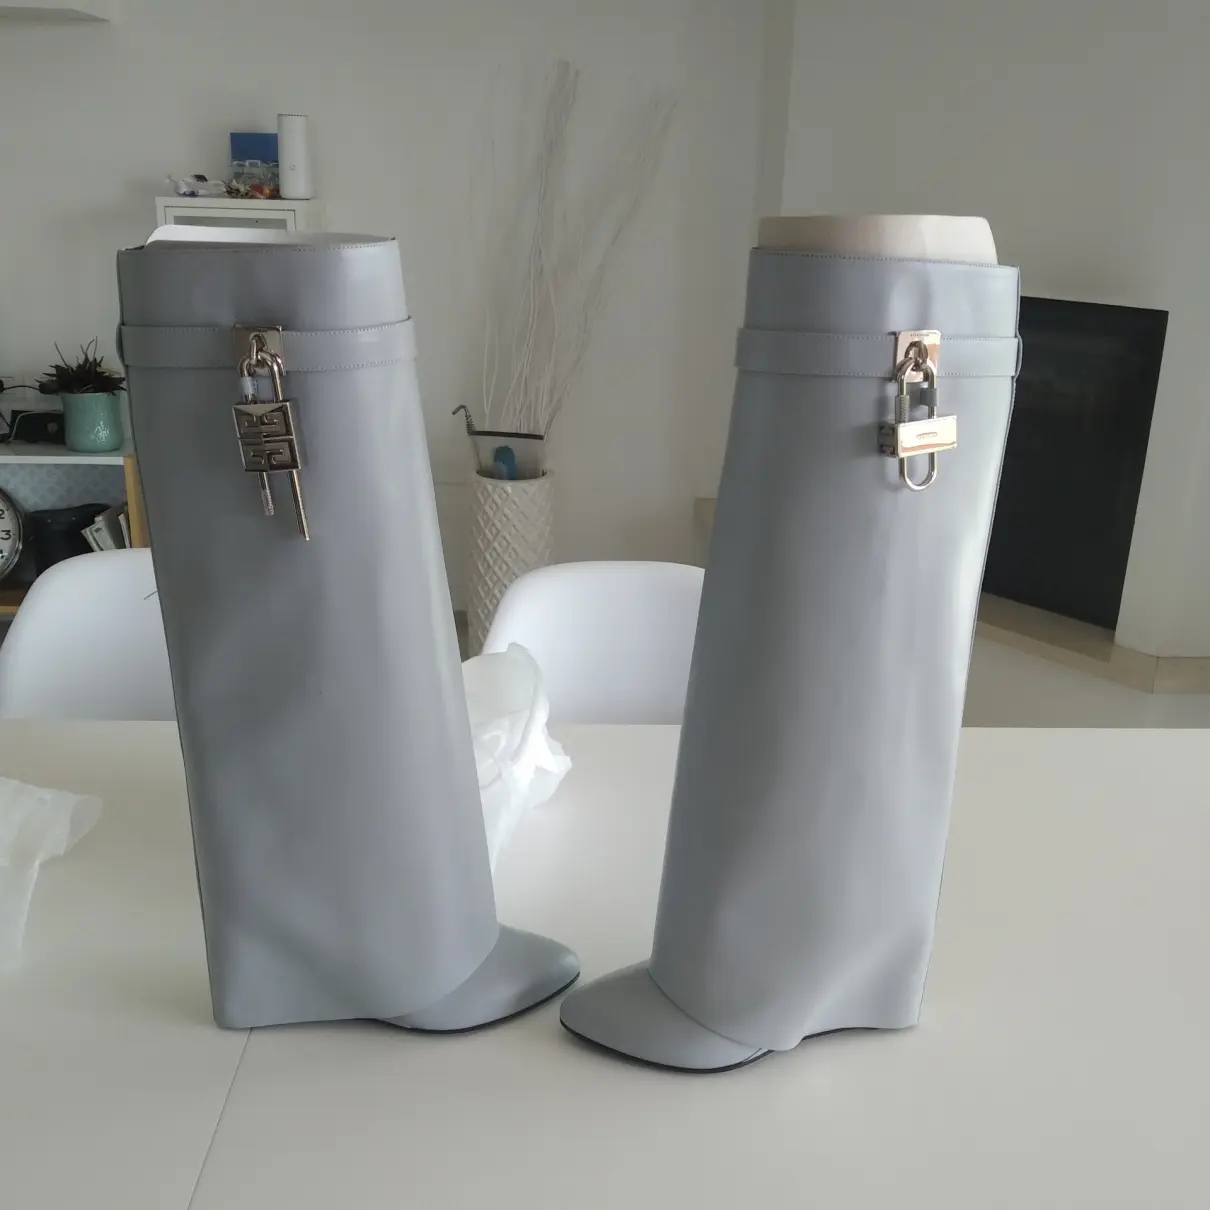 Buy Givenchy Shark leather boots online